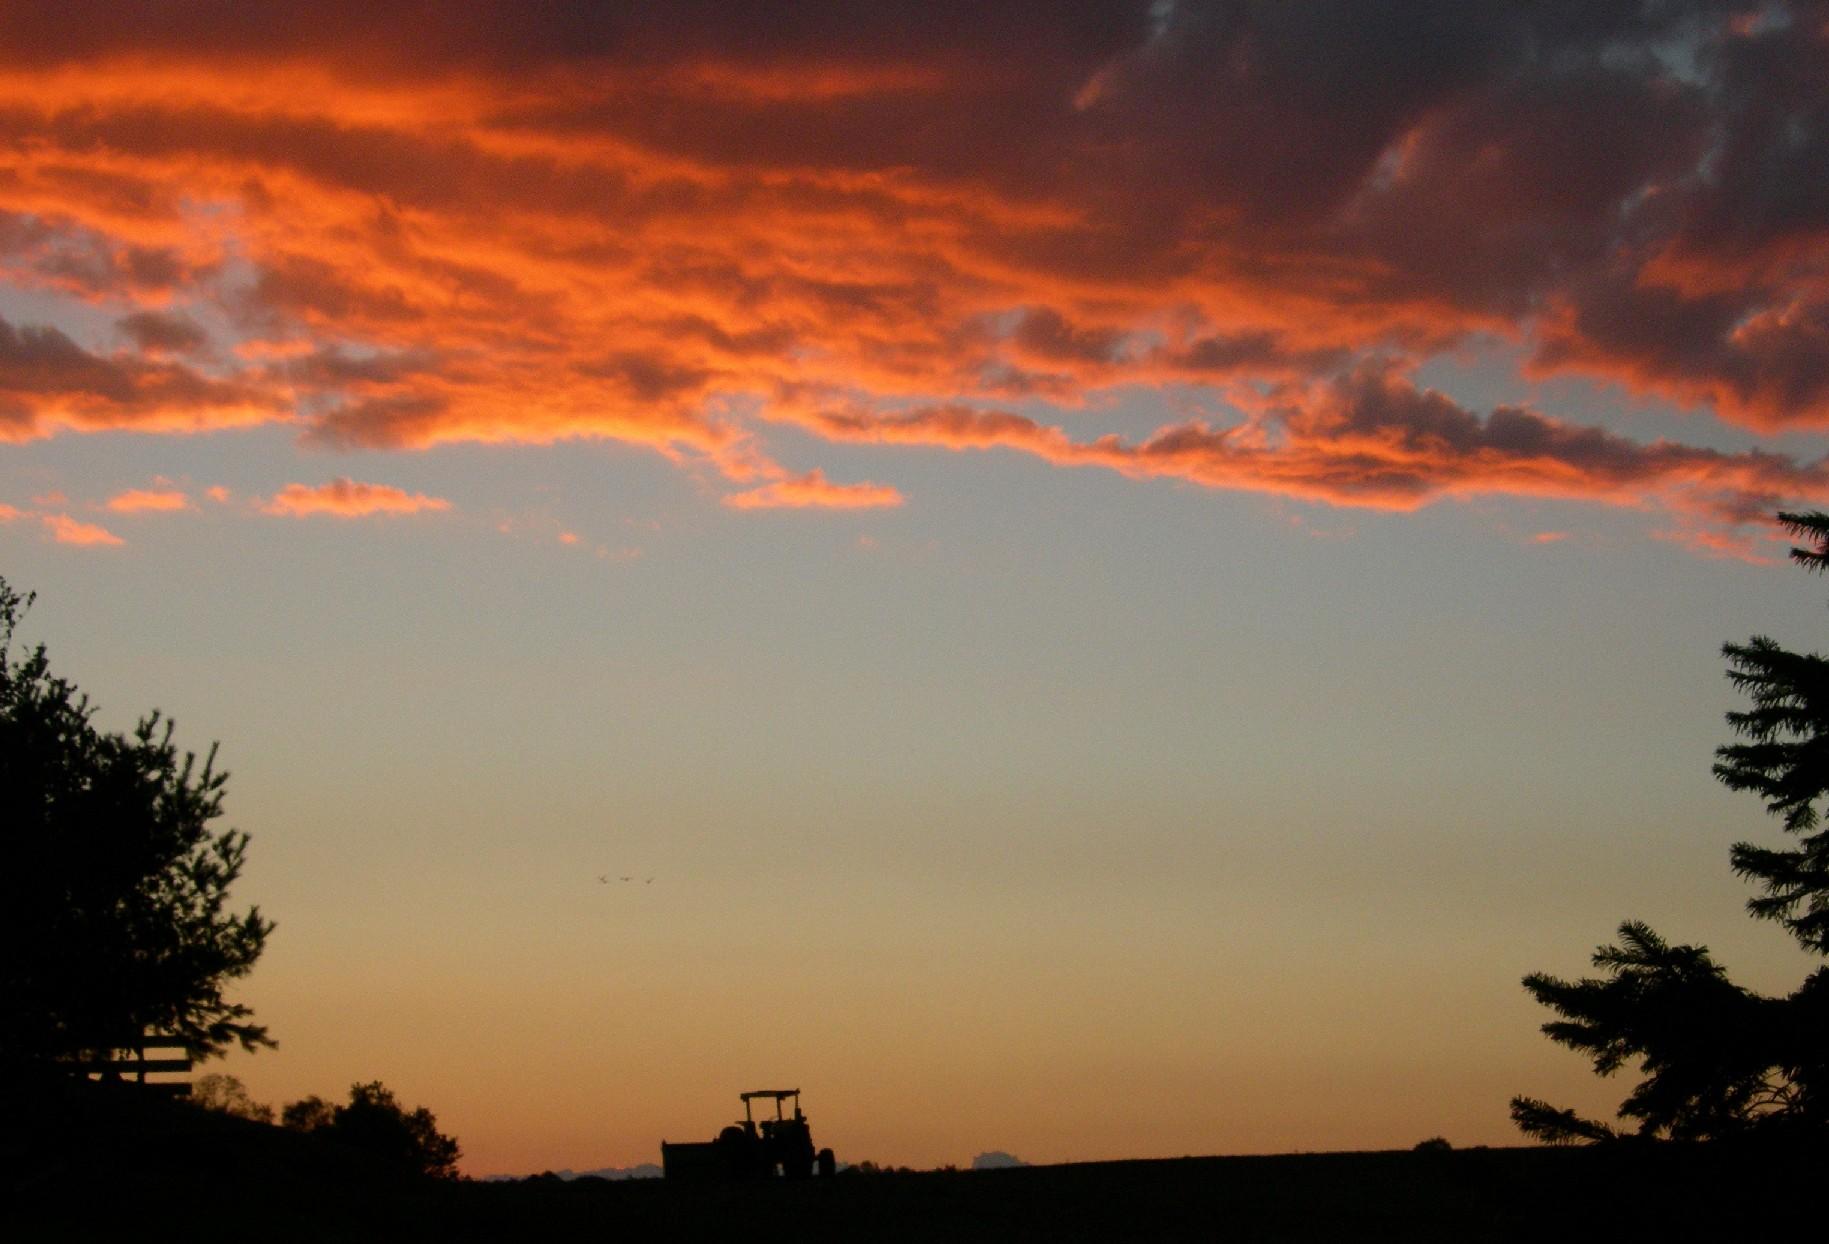 Fall Sunset with Farm Tractor (user submitted)